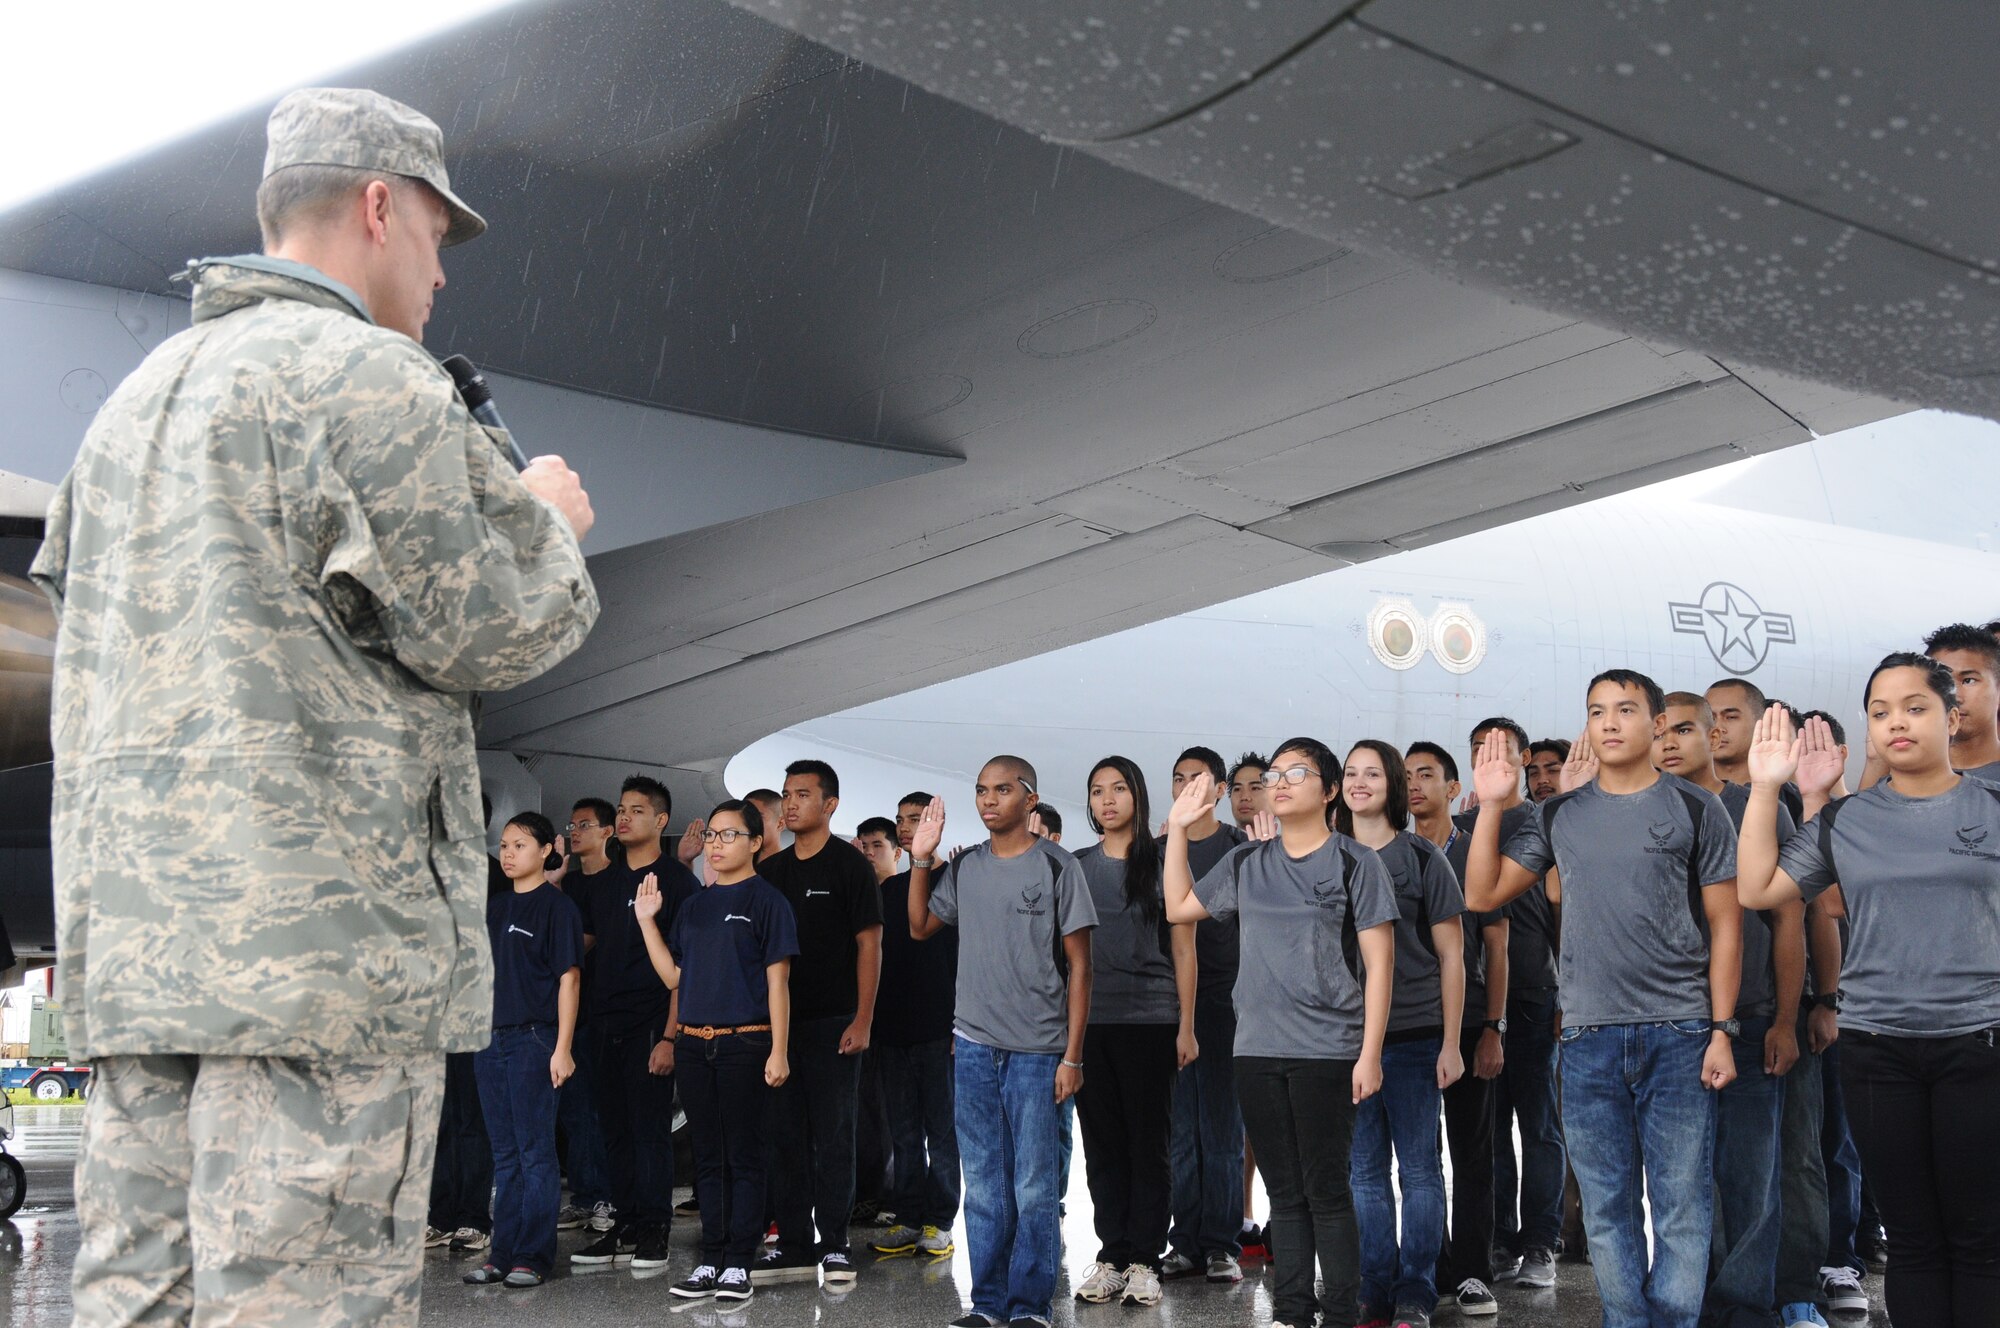 U.S. Air Force Brig. Gen.  Steven D. Garland, 36th Wing commander, administers the Oath of Enlistment to Air Force and Marine recruits underneath a KC-135 Stratotanker aircraft during the 2012 Andersen Air Force Base Open House in Guam Oct. 13.  This year’s open house is the first since 2009. (U.S. Air Force photo by Senior Airman Carlin Leslie/Released)